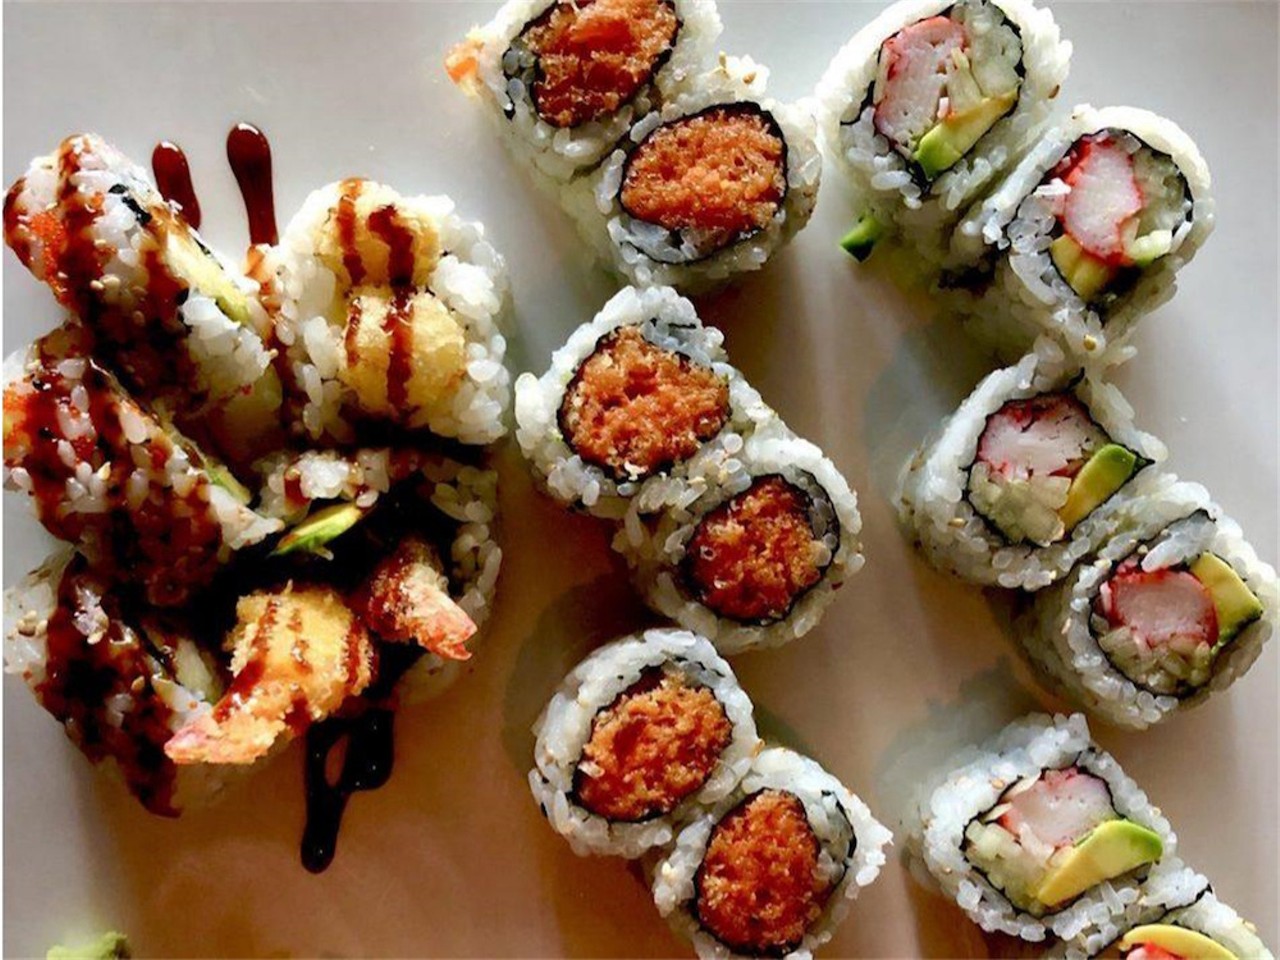 Umami Endless Sushi & Bar
3942 Tyrone Blvd. N, St. Petersburg, 727-800-2799
St. Pete’s endless sushi spot, Umami, serves a variety of both raw and cooked endless rolls and sashimi. All-you-can-eat lunch costs $19.95 and dinner costs $28.95, beginning at 3 p.m. daily. Leftovers will be charged a la carte, so make sure you're hungry.
Photo via Umami/website